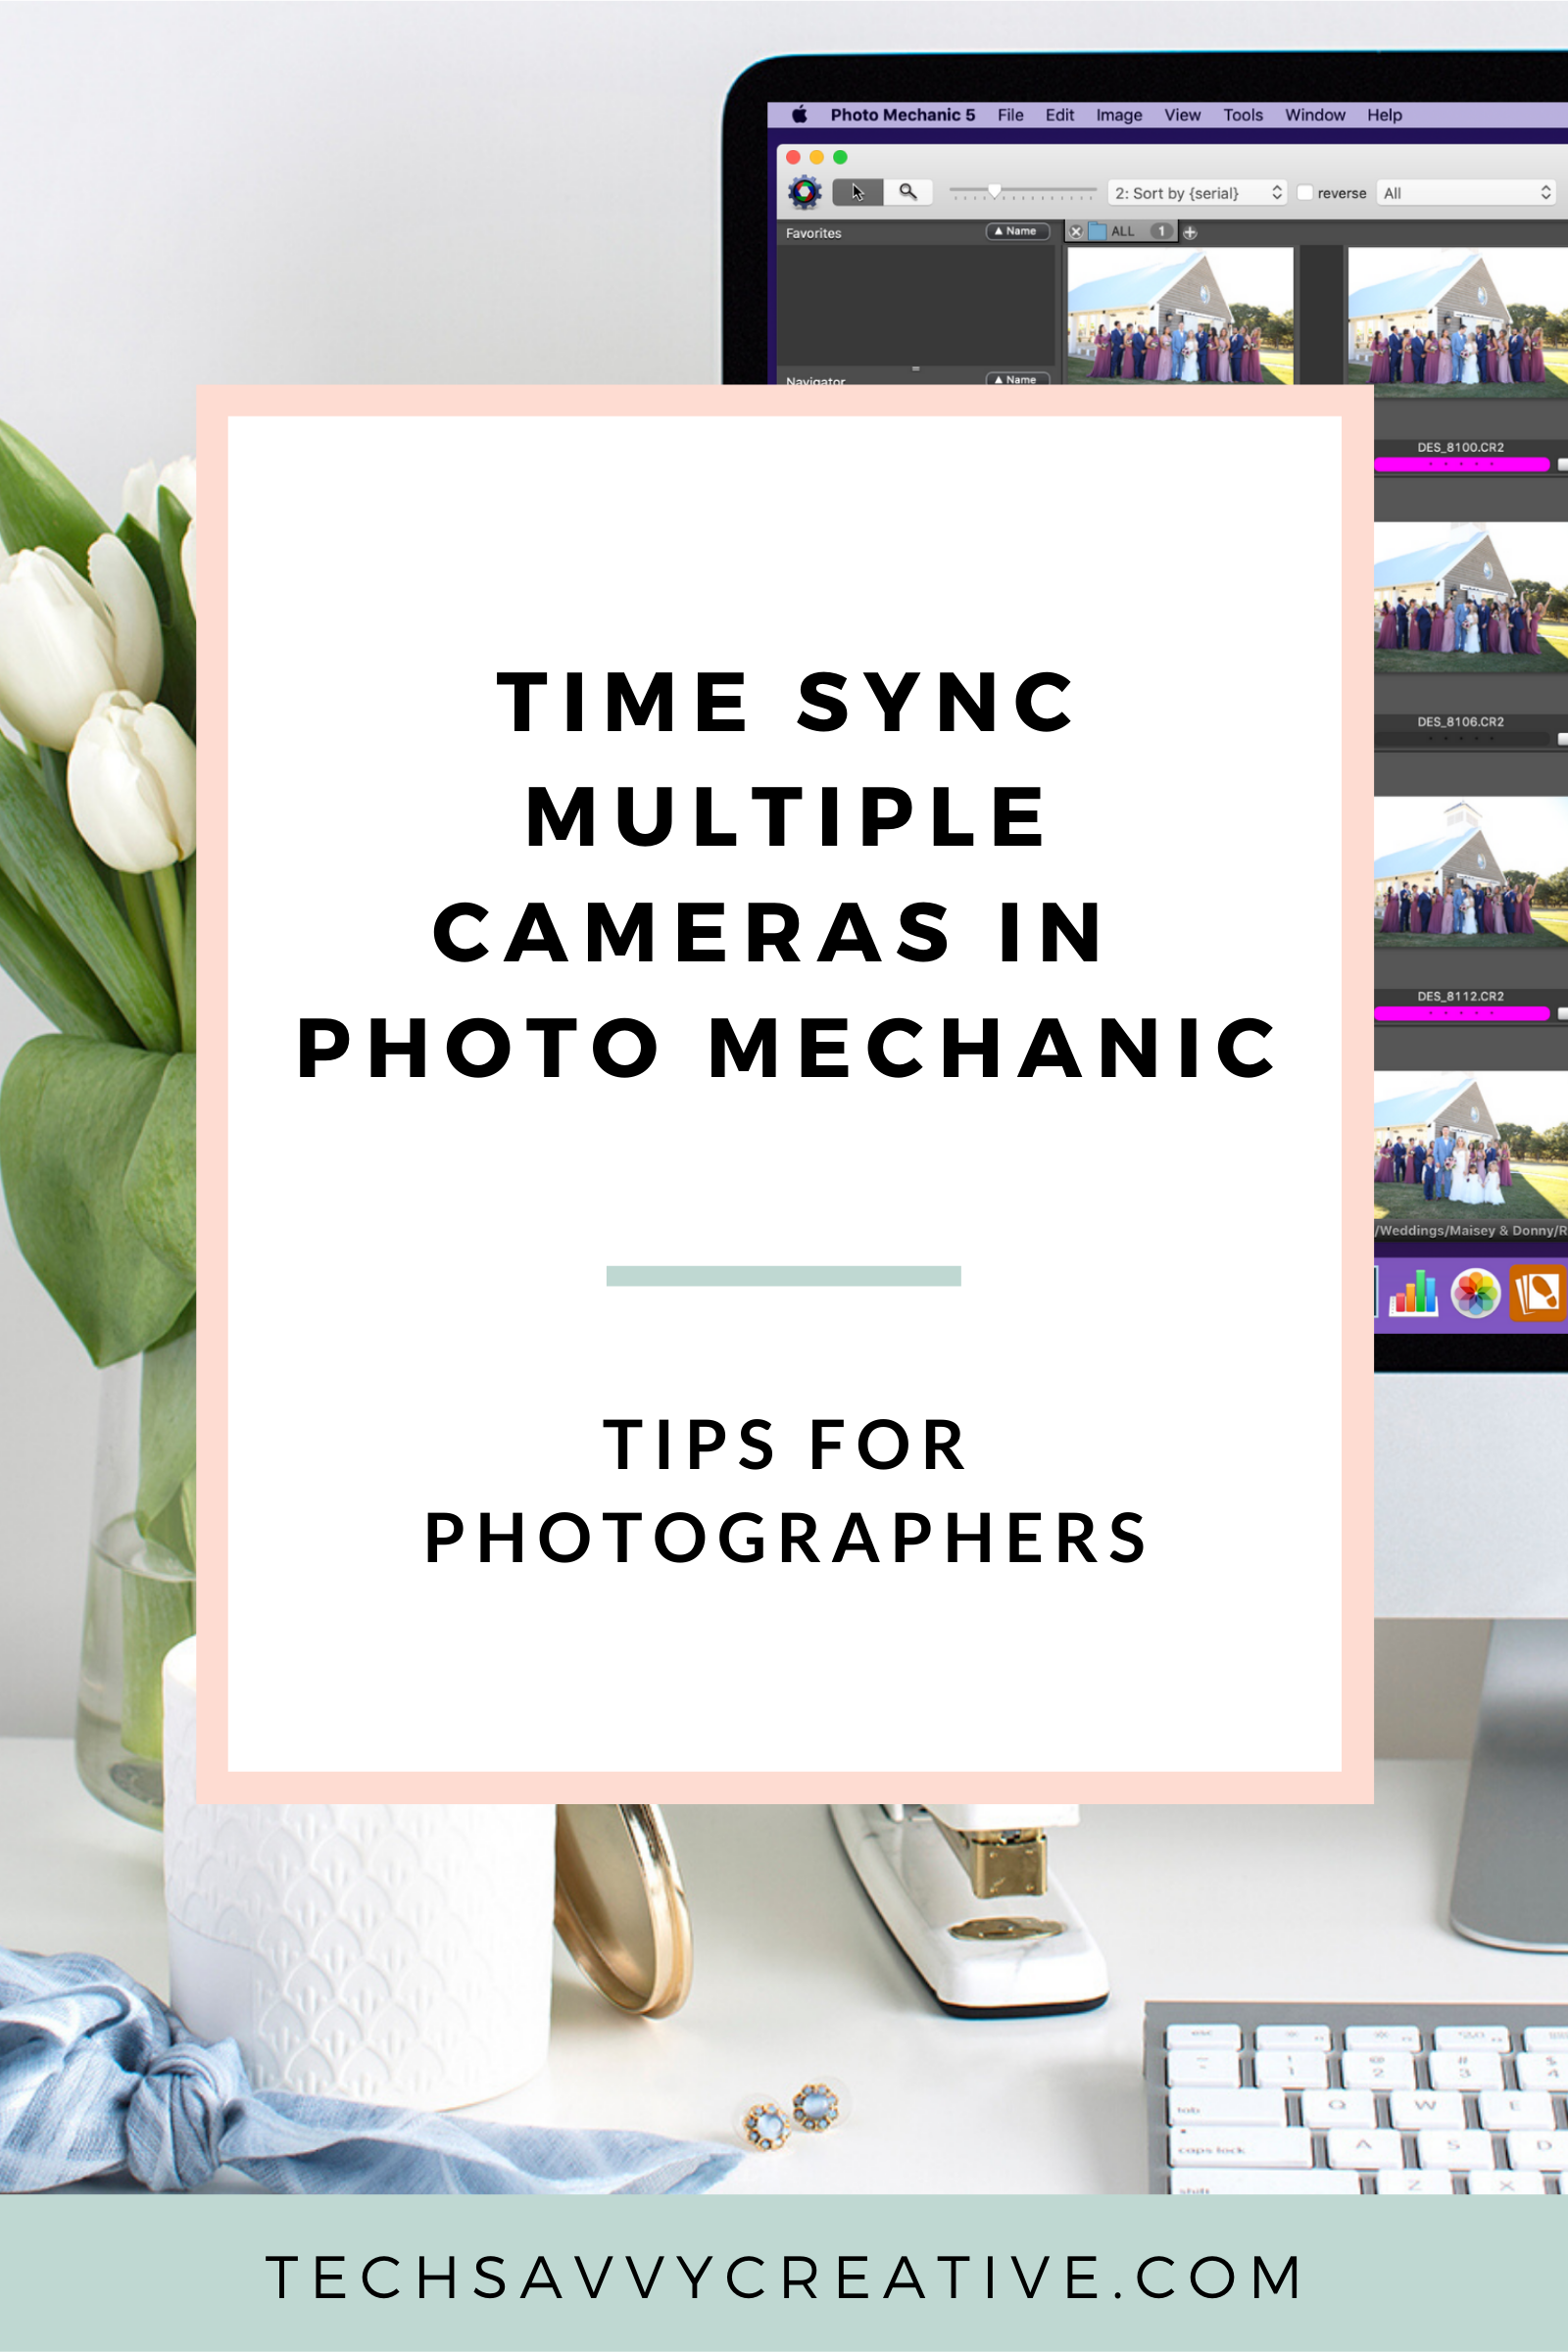 How To Time Sync Multiple Cameras Using Photo Mechanic, Tech Savvy Creative